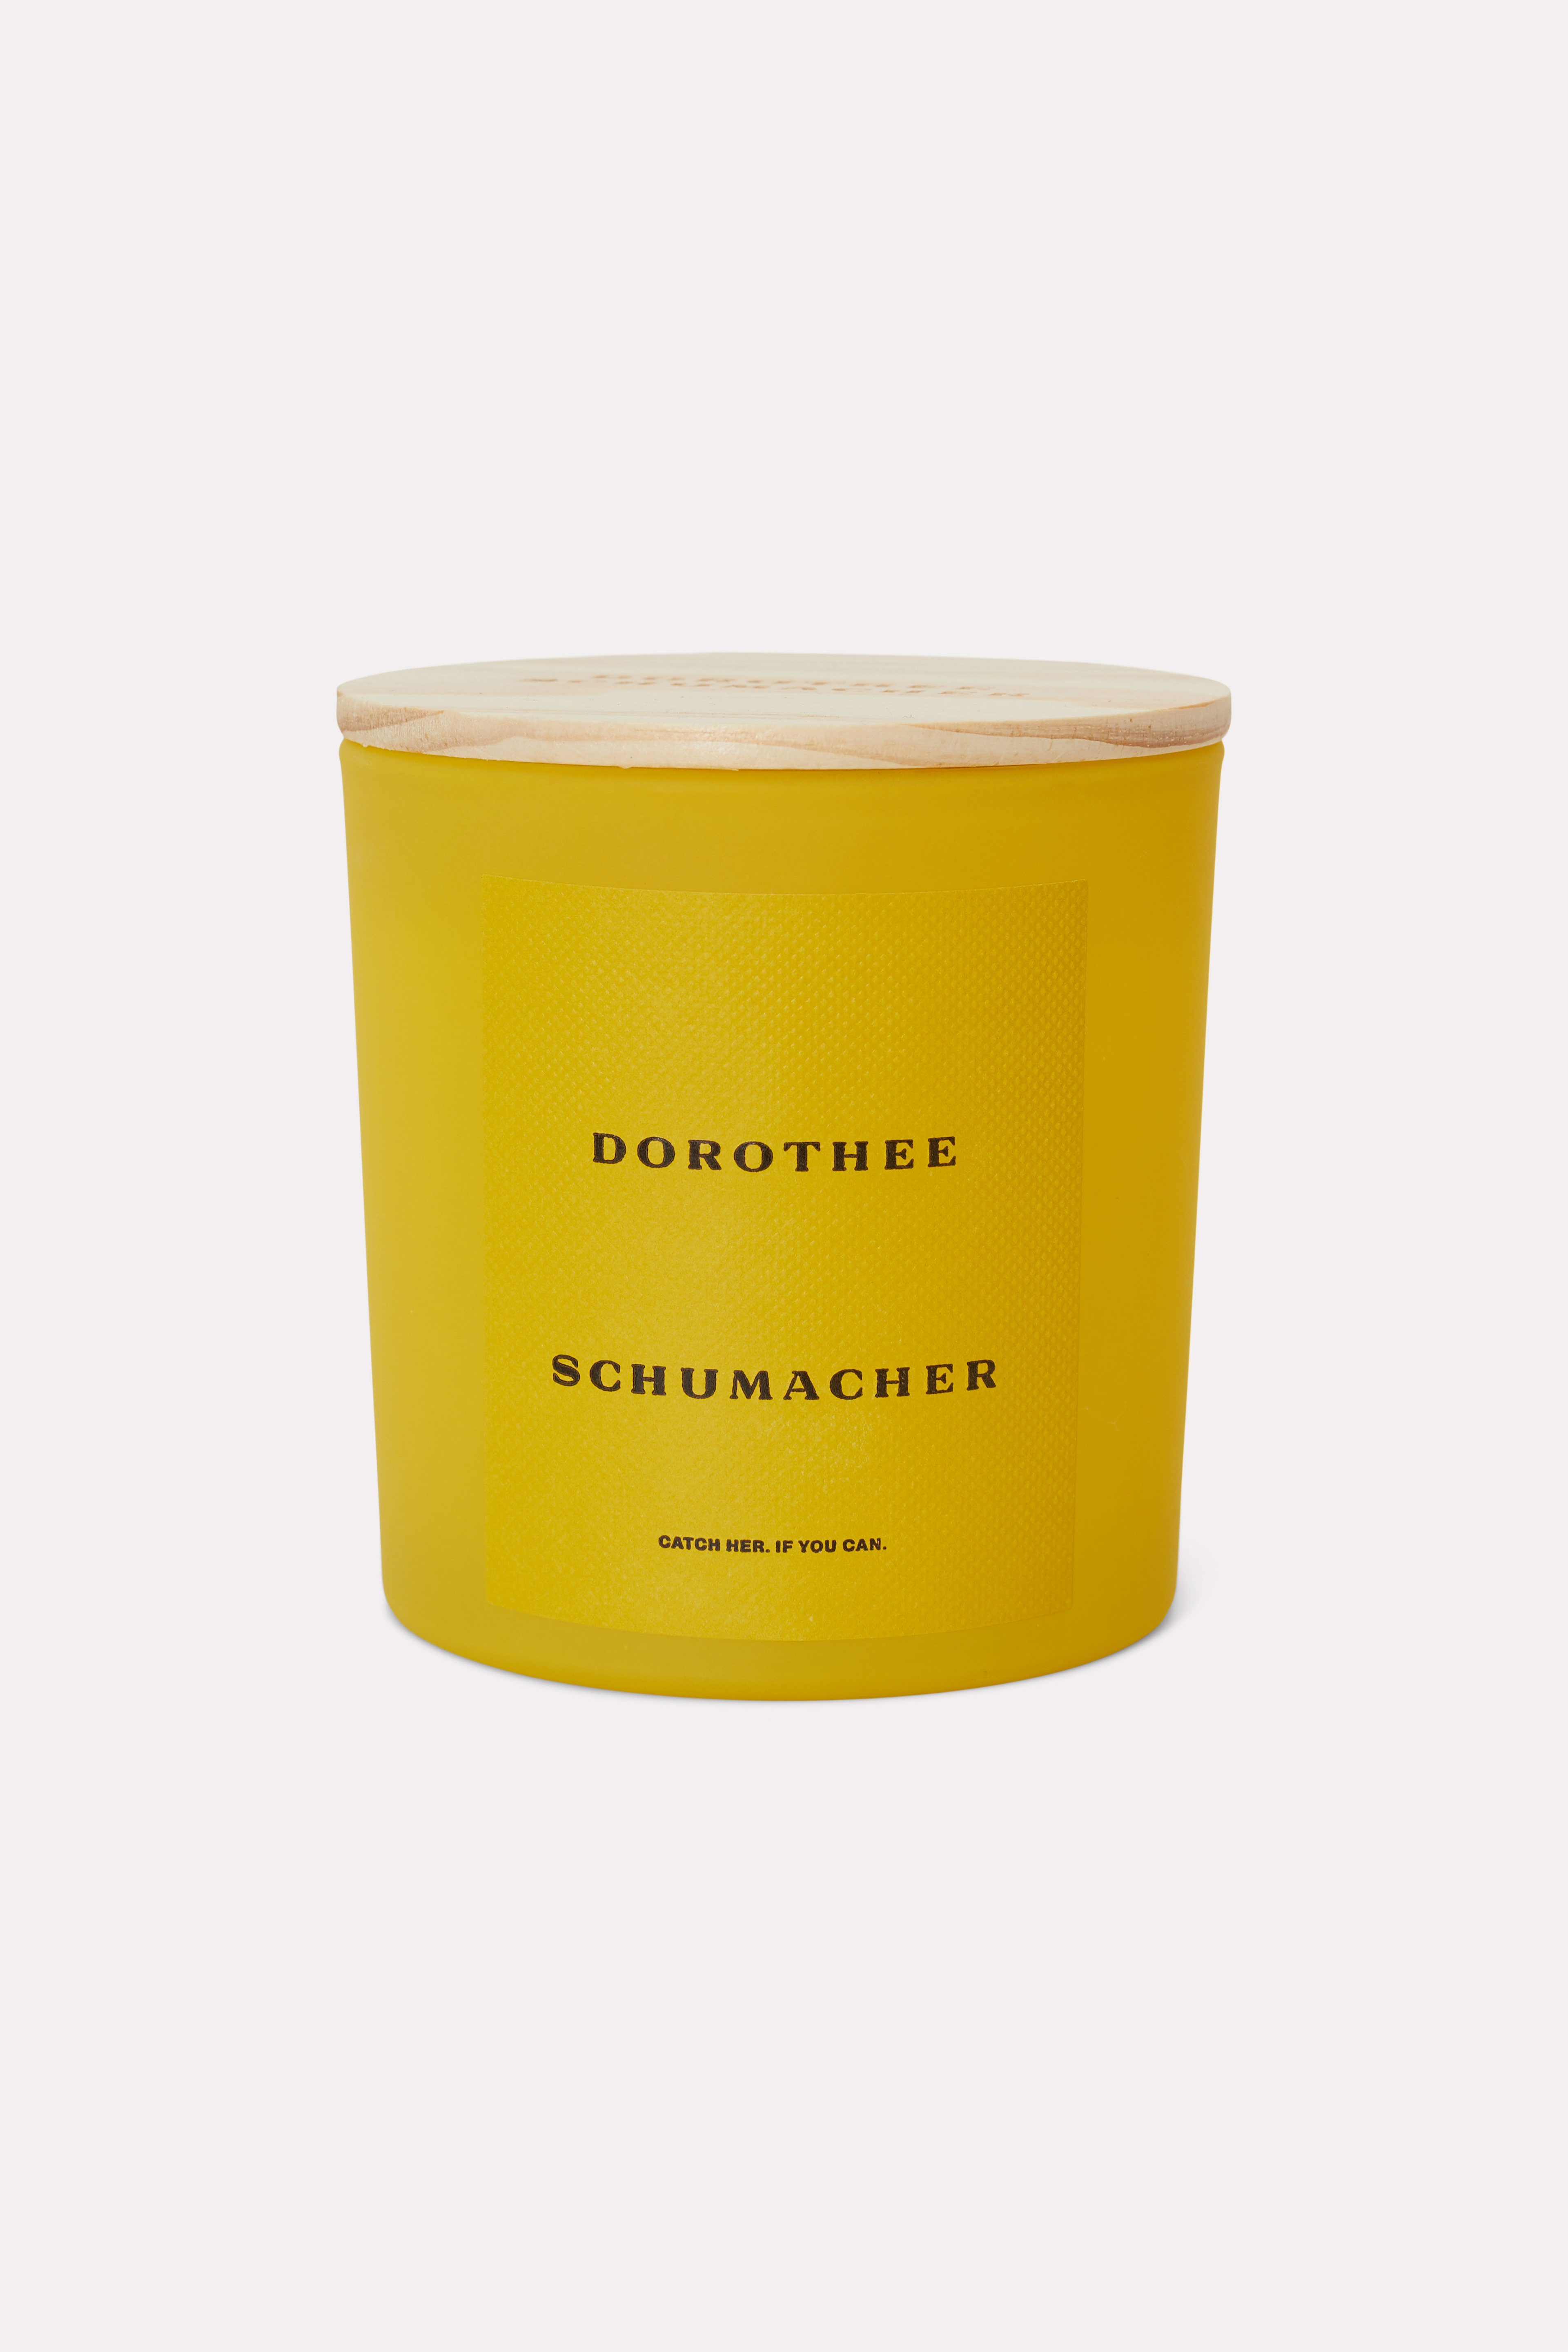 Dorothee Schumacher Large Scented Soy Wax Candle With Wooden Lid In Yellow